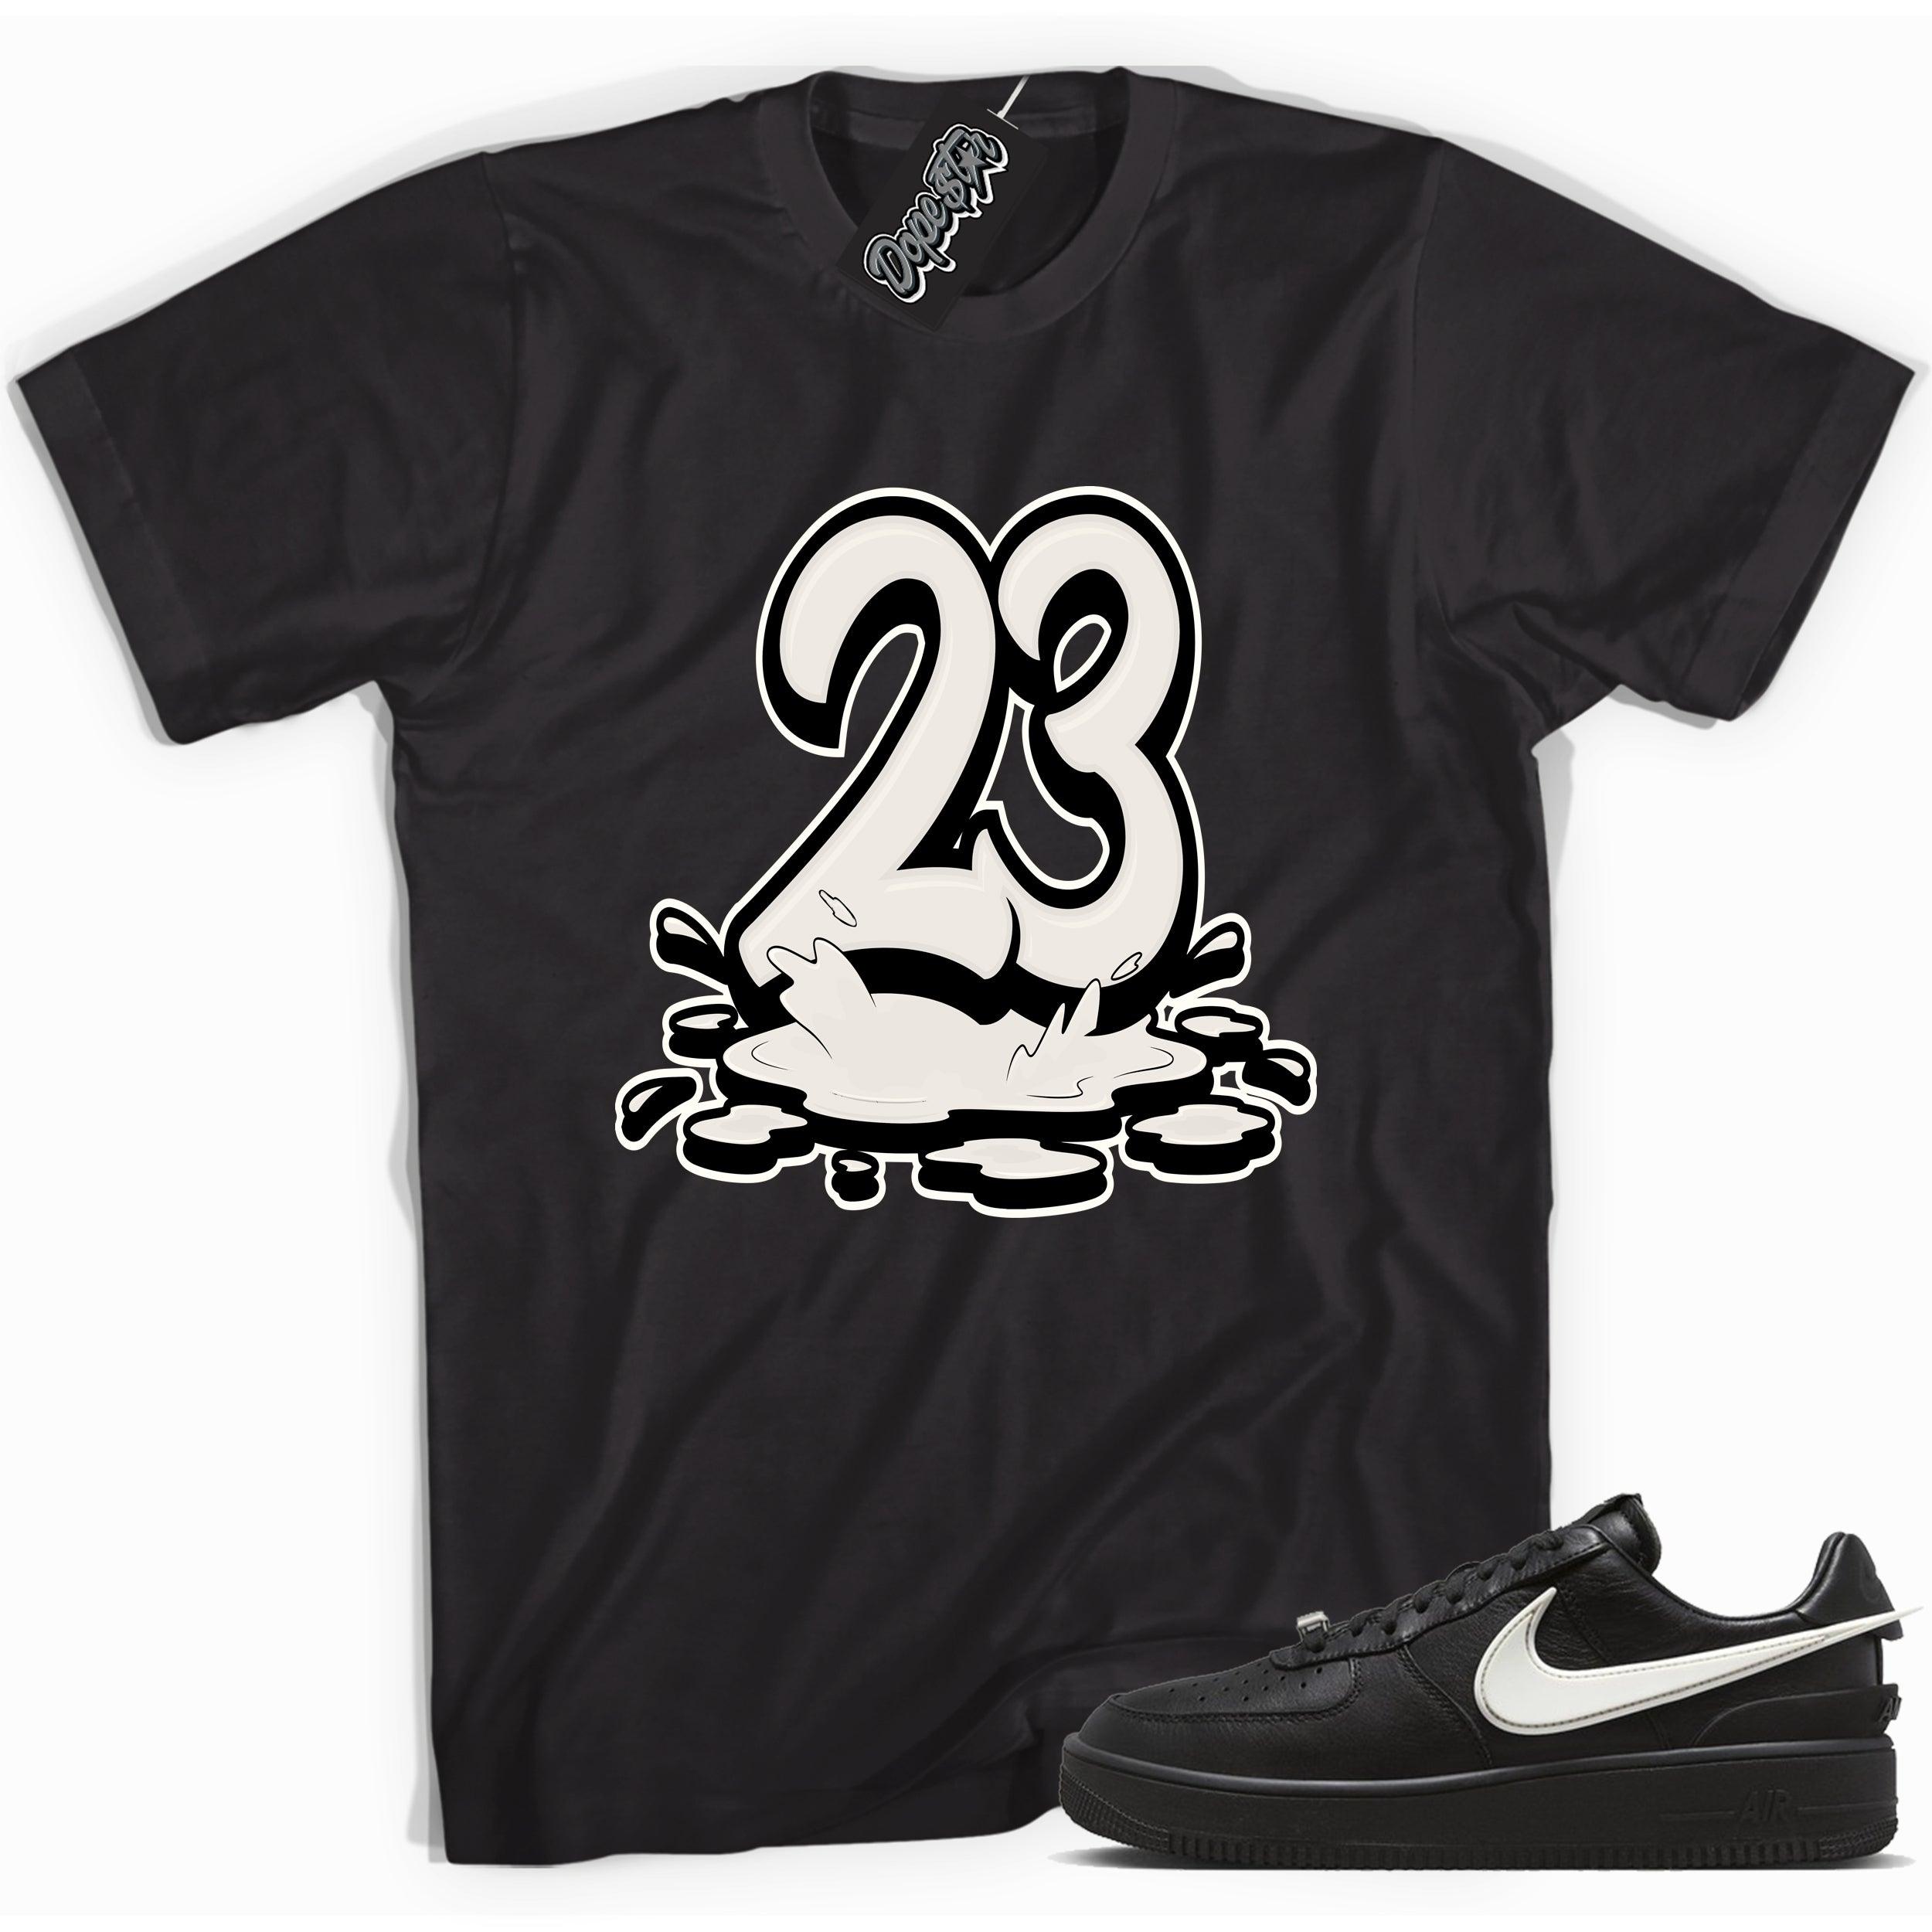 Cool black graphic tee with '23 melting twenty three melting' print, that perfectly matches Nike Air Force 1 Low SP Ambush Phantom sneakers.